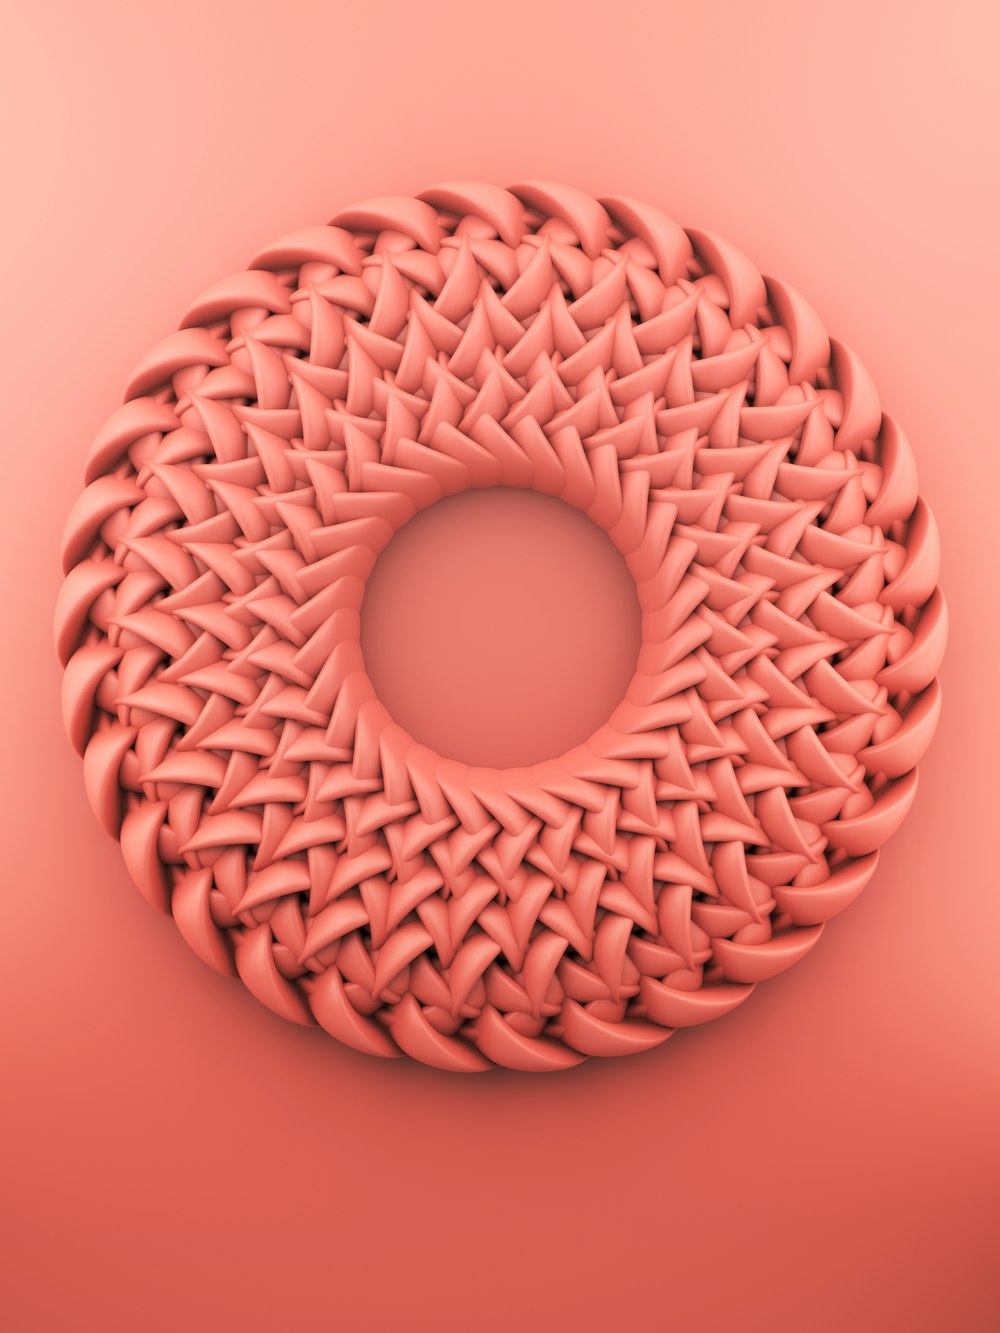 brown round ornament on pink surface